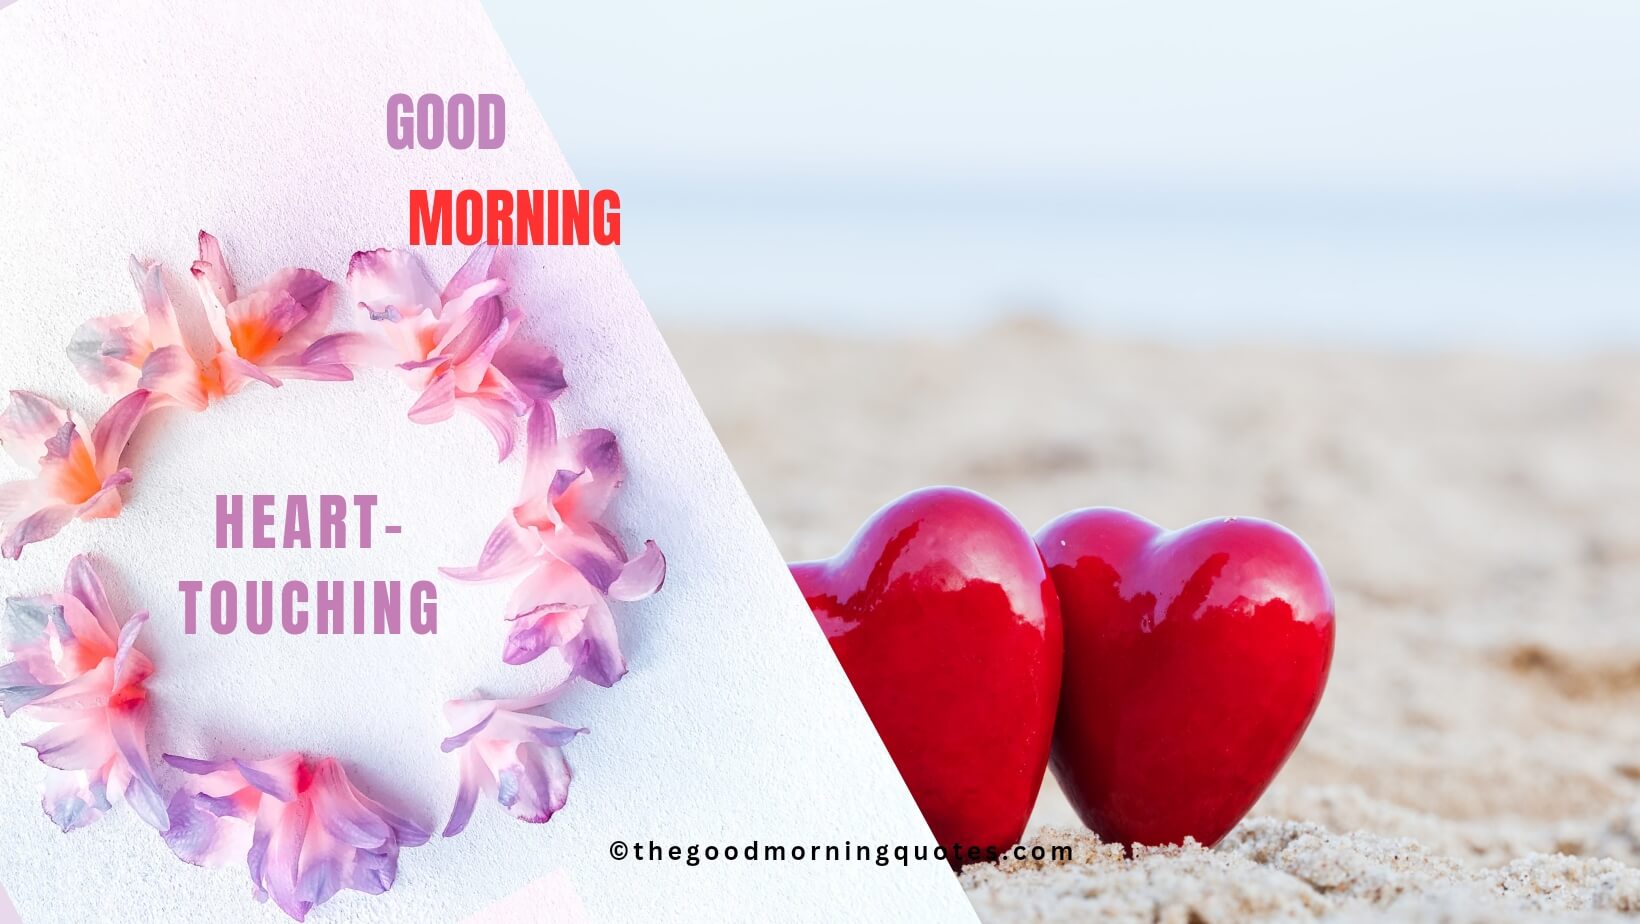 Good Morning Image with Heart-Touching Quotes in Hindi